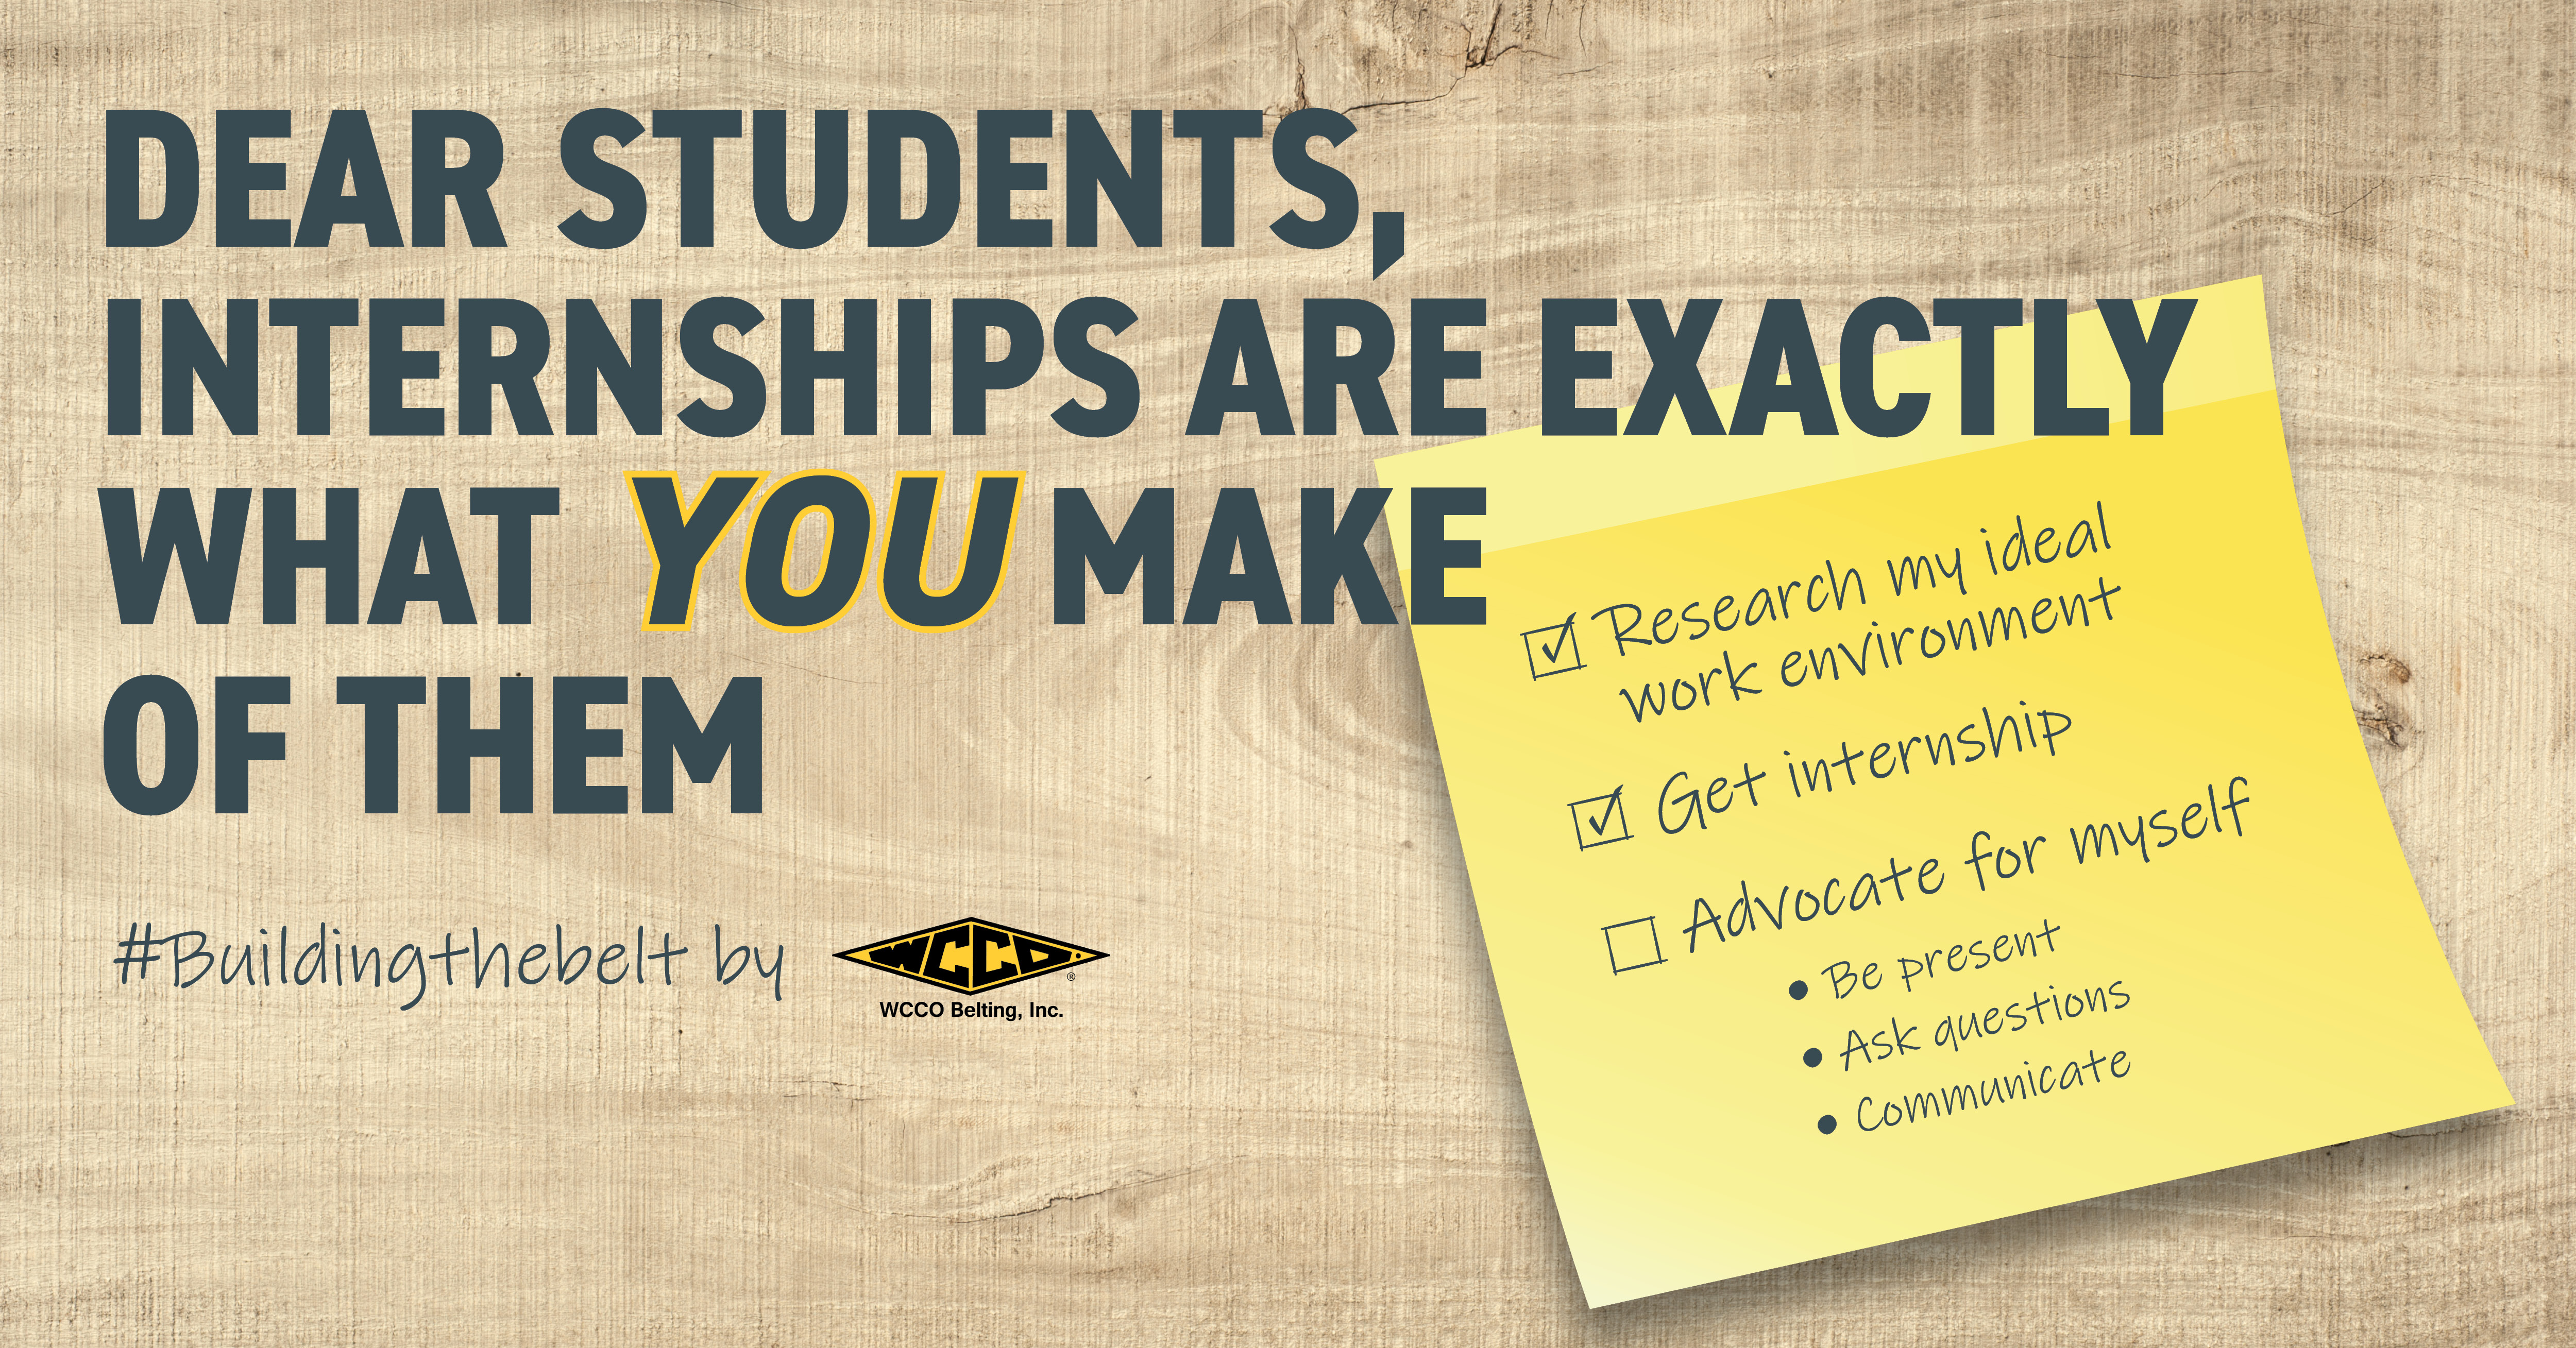 Dear students, internships are exactly what YOU make of them, Blog Post